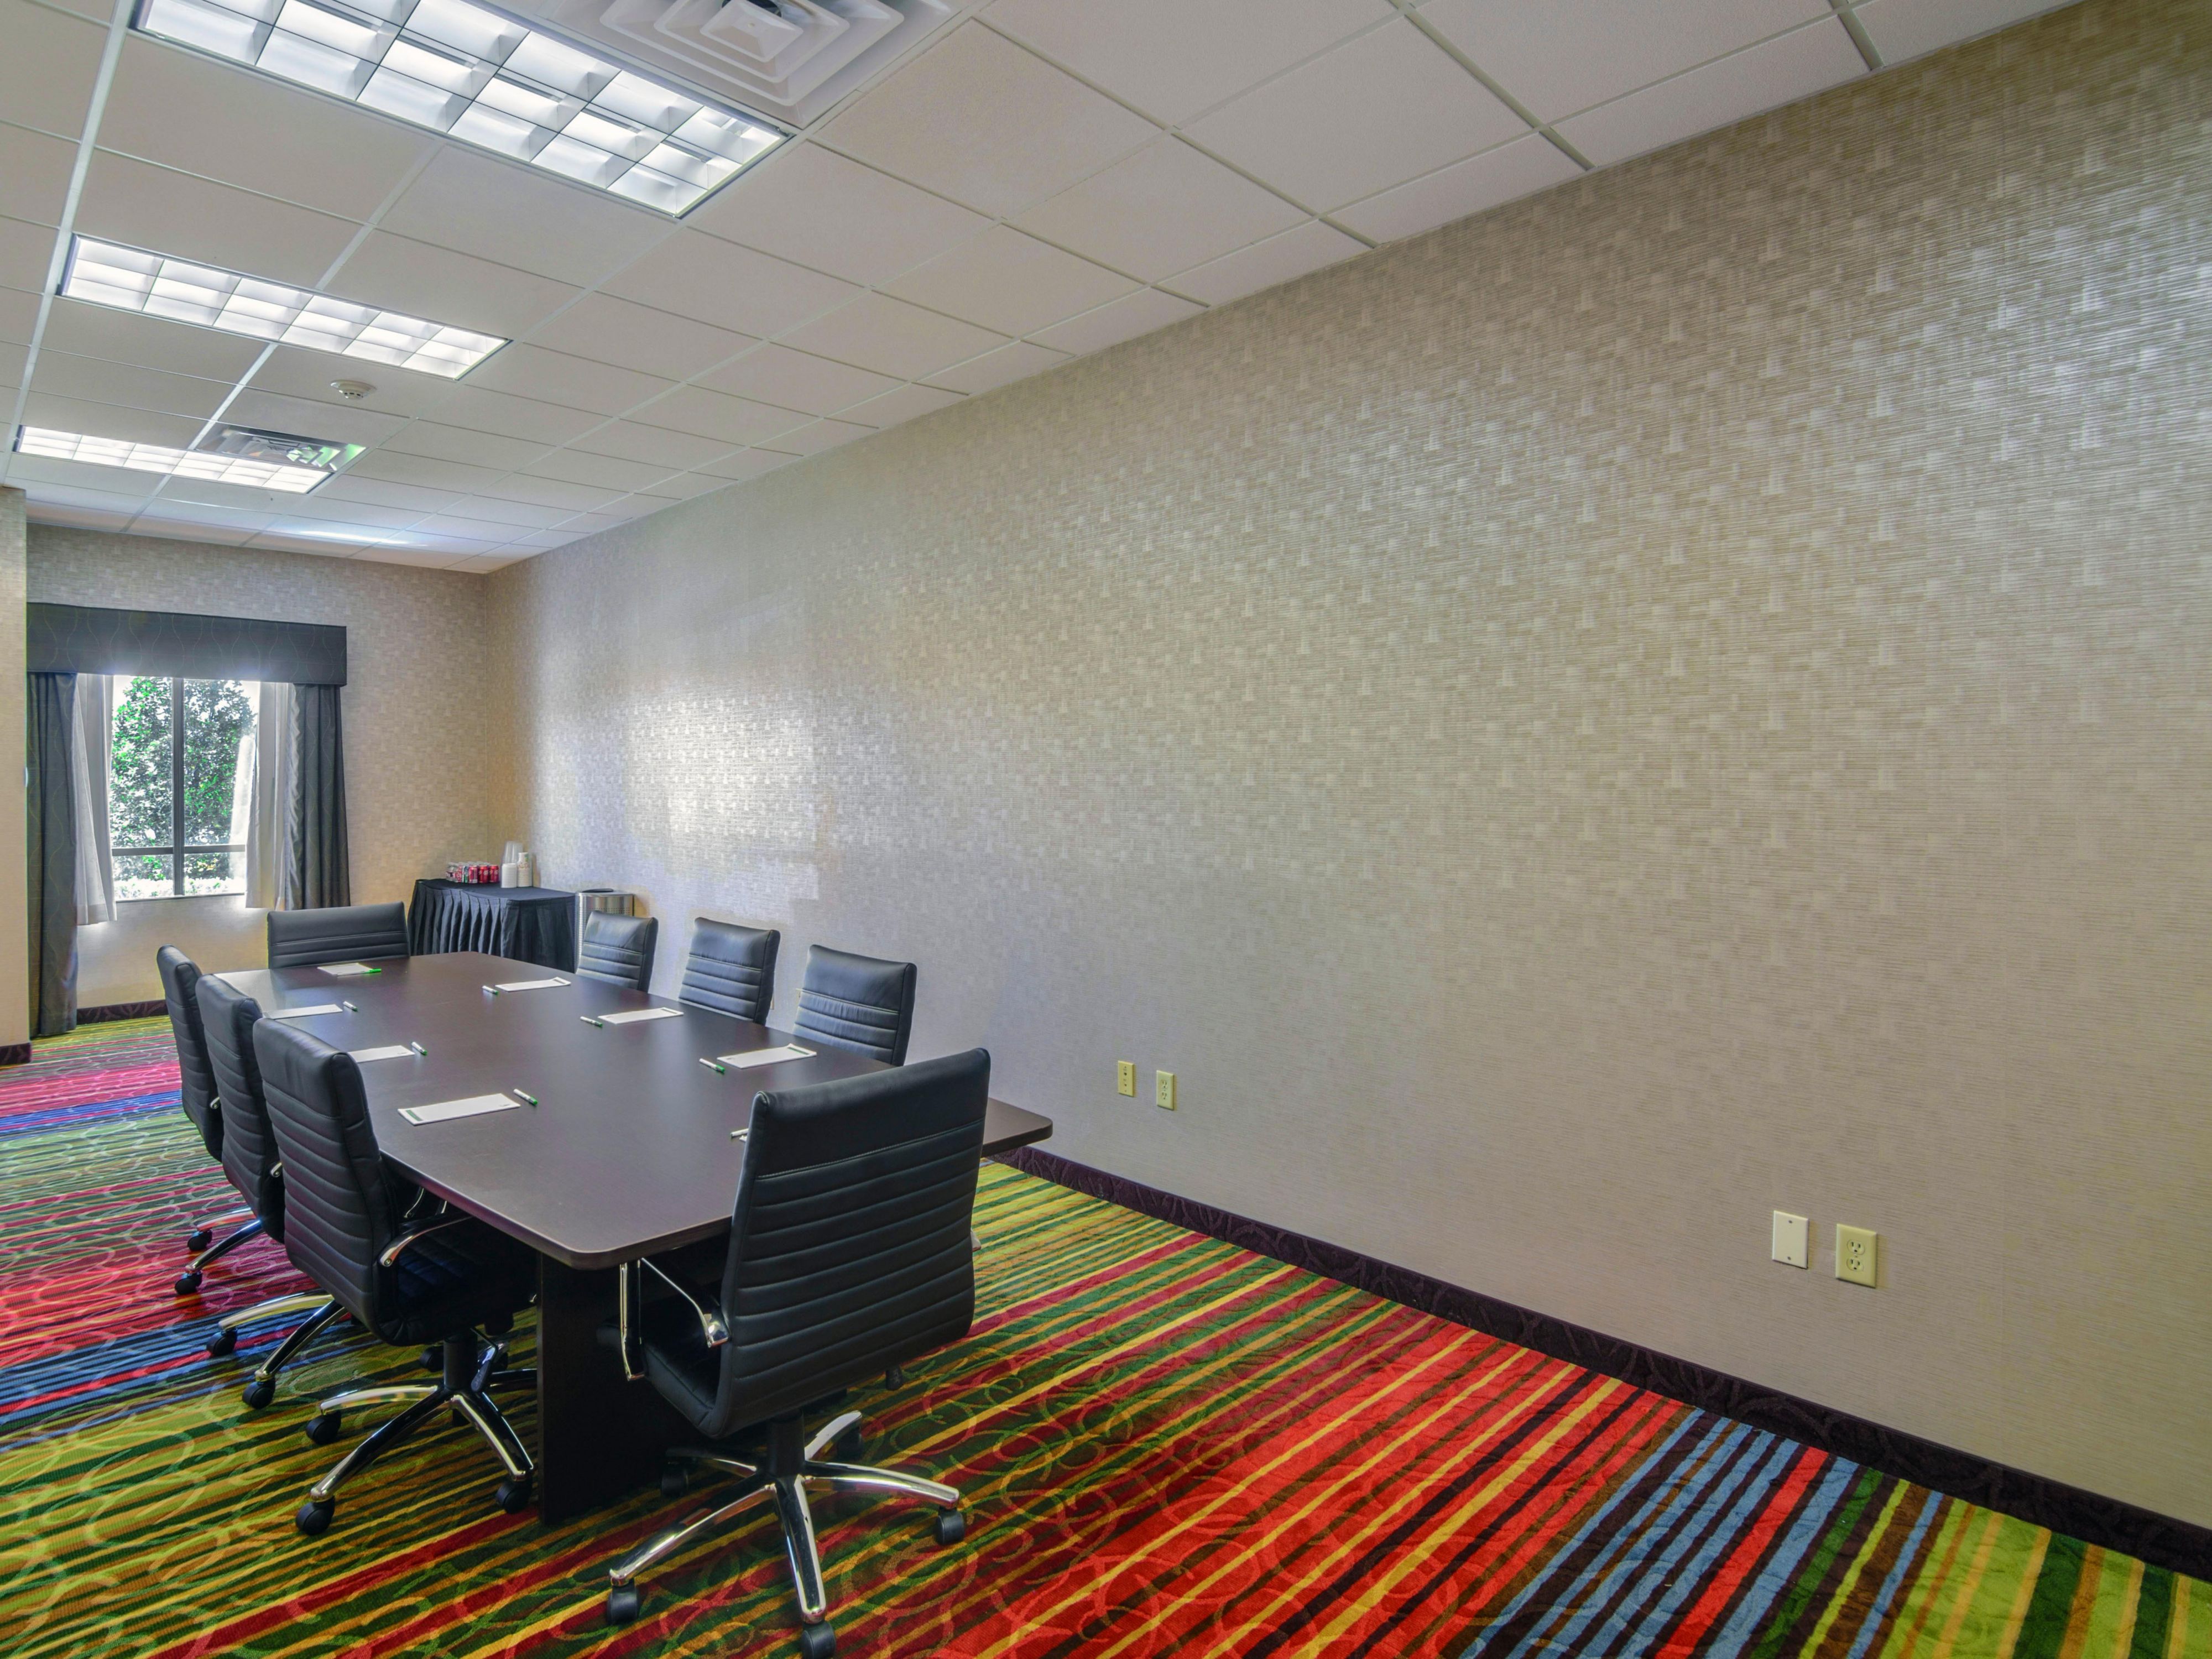 We have over 2,400 square of meeting space for our Cowboys Ballroom that can accommodate 100pp. Our ballroom can break into 3 sections. We also have a Boardroom & Media Room. Call the hotel directly and speak with our Sales Department for more information. 